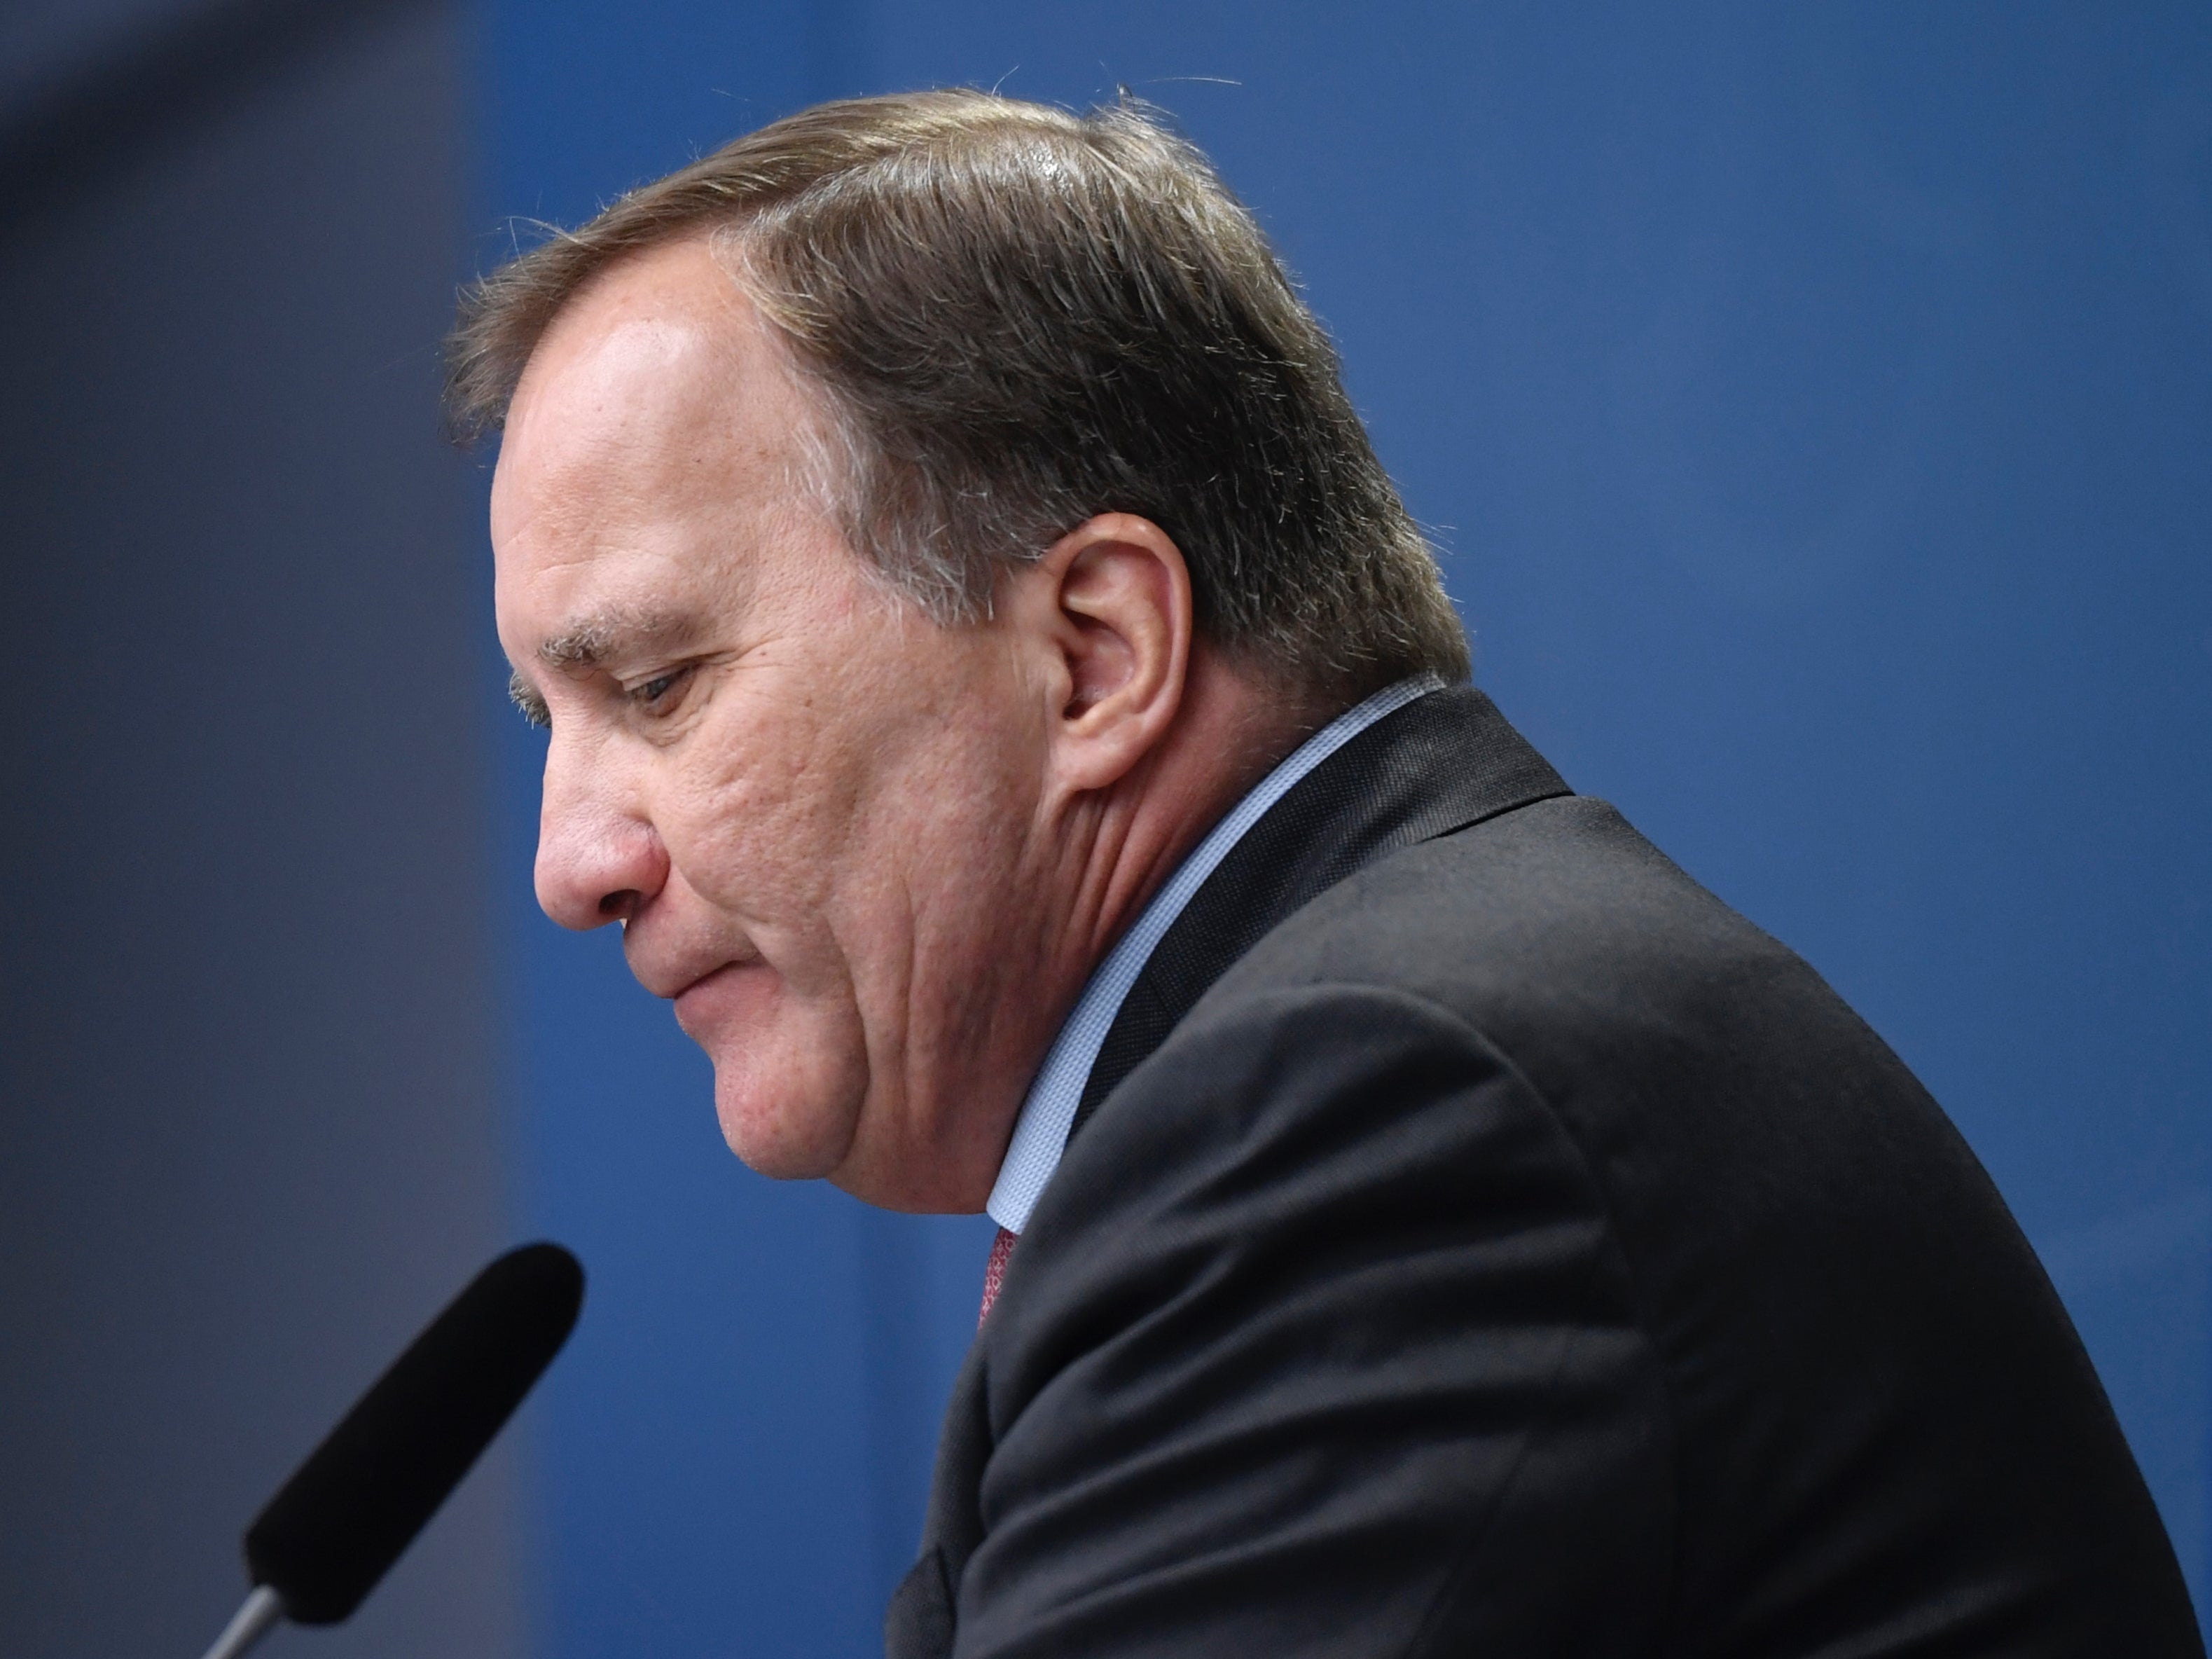 Stefan Lofven announces he has asked the parliament speaker to find a new government